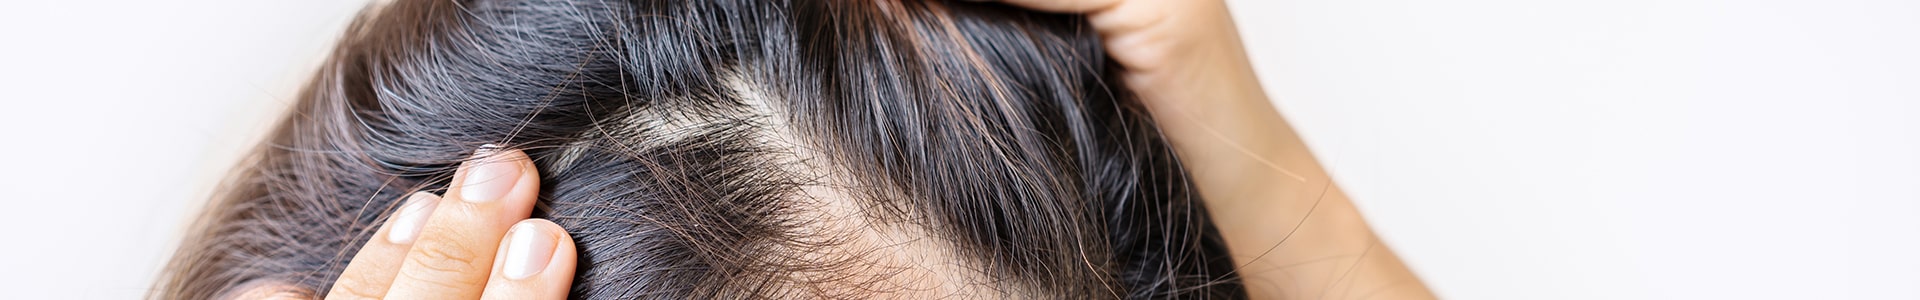 hair loss treatments for men and women